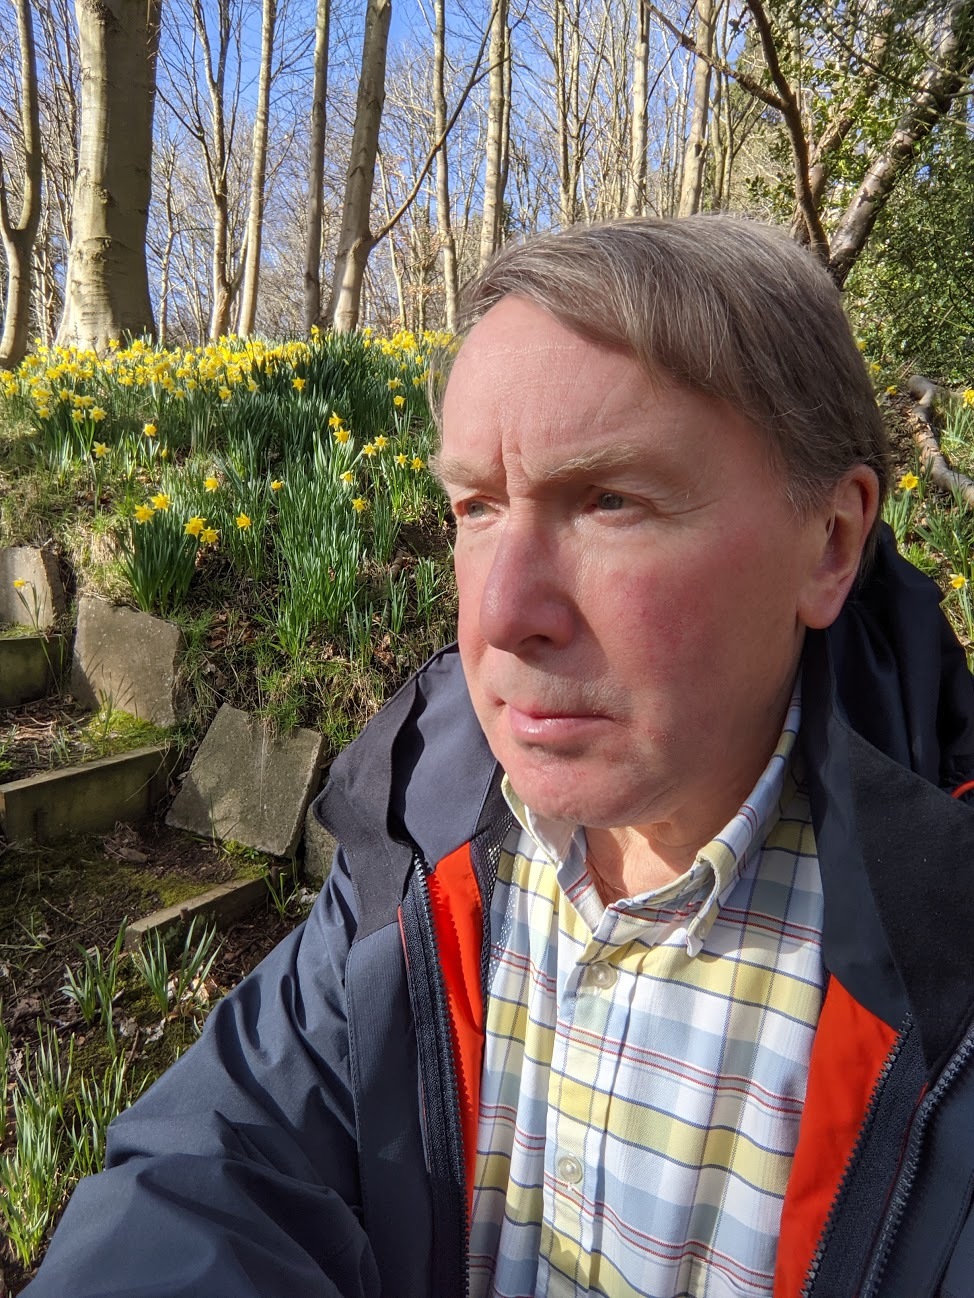 John Oldham, chairman of the Esk Valley Trust, is hoping that, through a new programme of talks via Zoom and guided walks when Covid-19 restrictions ease, people will find out more about the features and attractions of the Esk River valleys. 